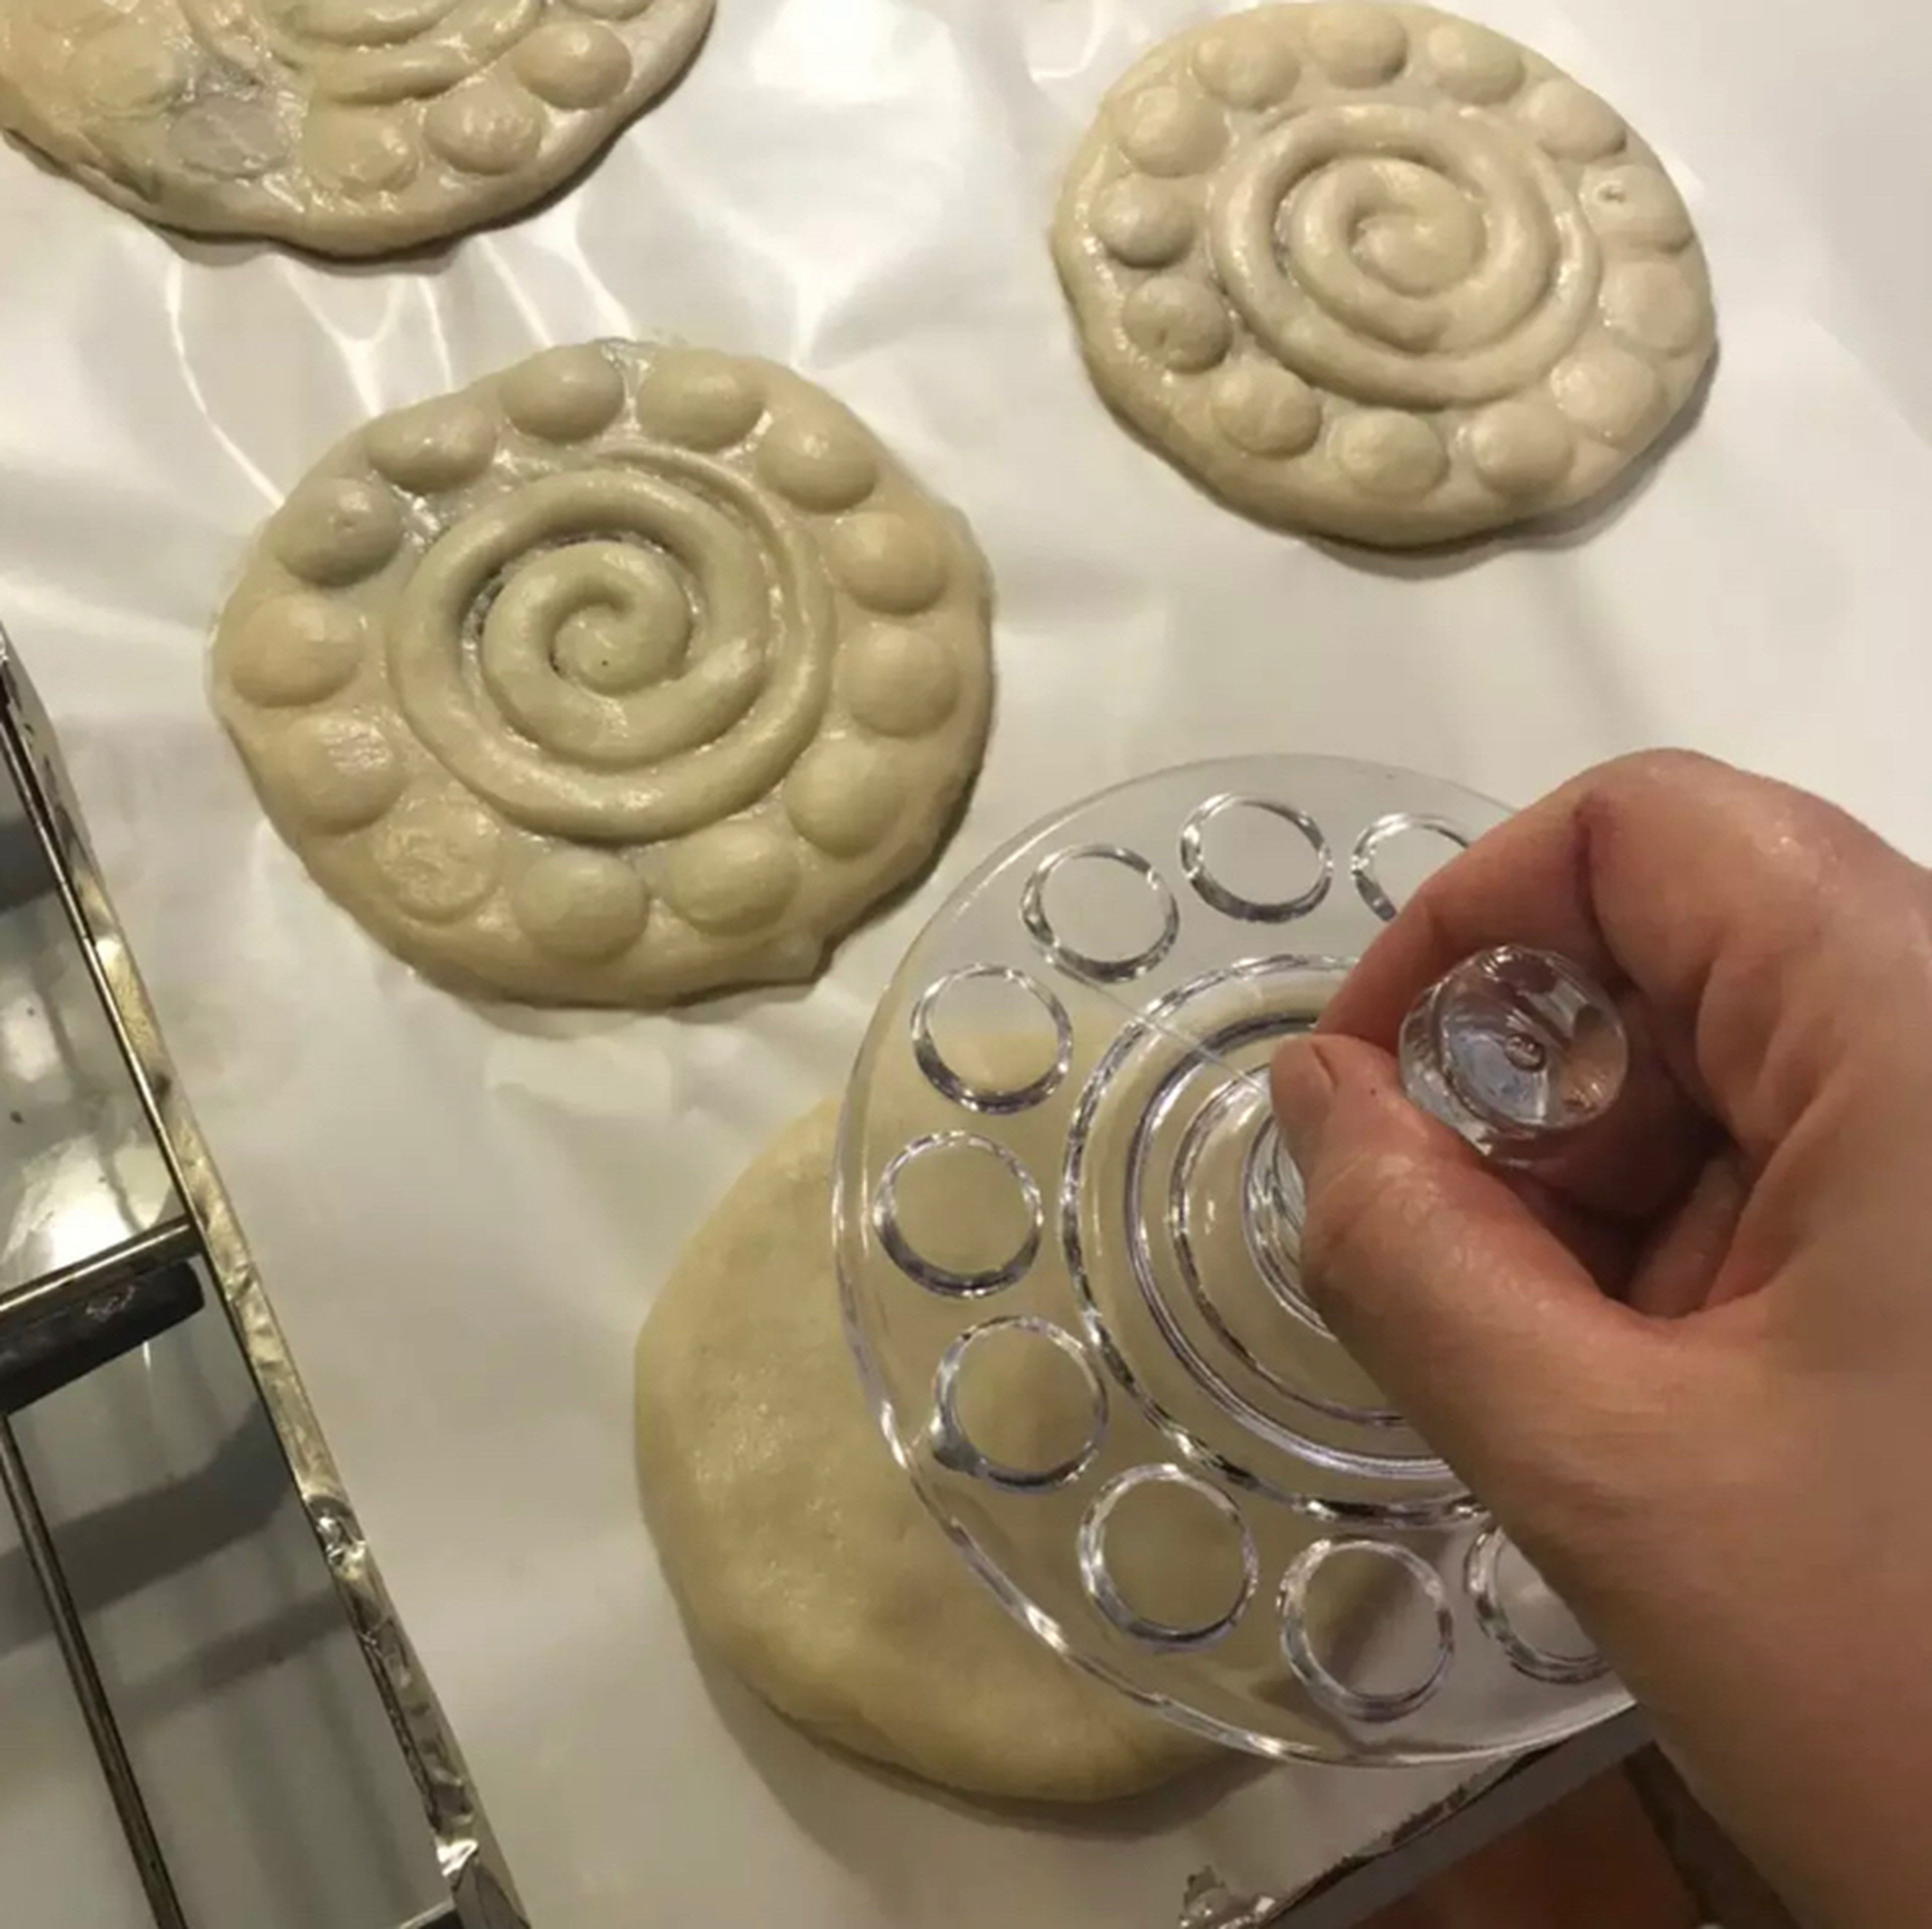 Then with anything like bottle cap or…you can design the cookies.